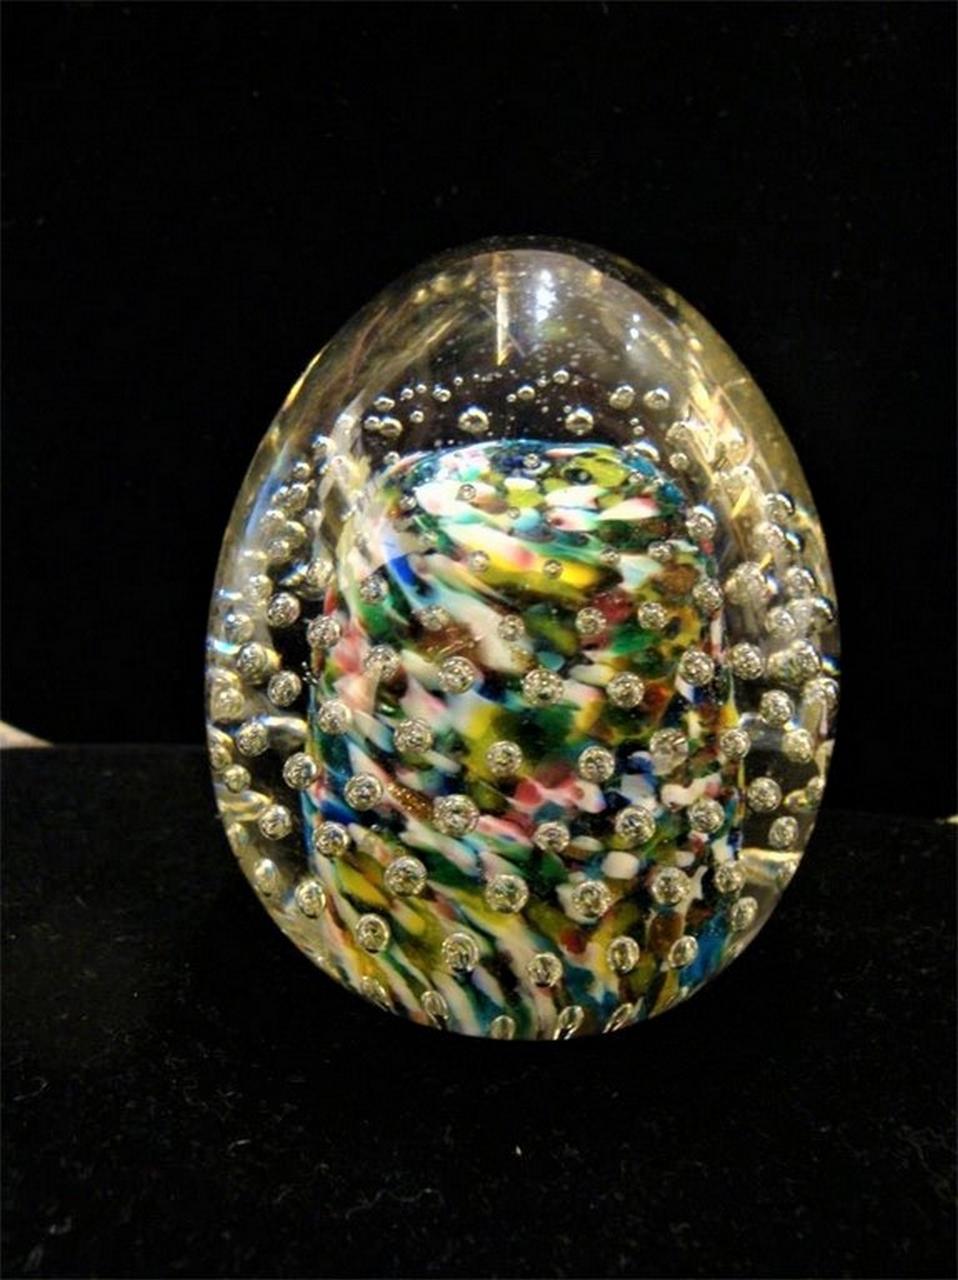 The Following Item that we are Offering is A Beautiful and Rare Exquisite Heavy Italian Millefiori Swirl Glass Paperweight with Bubbles. Outstandingly done with Magnificent Array of Multi Colored Breathtaking Detail. Taken out of a Private